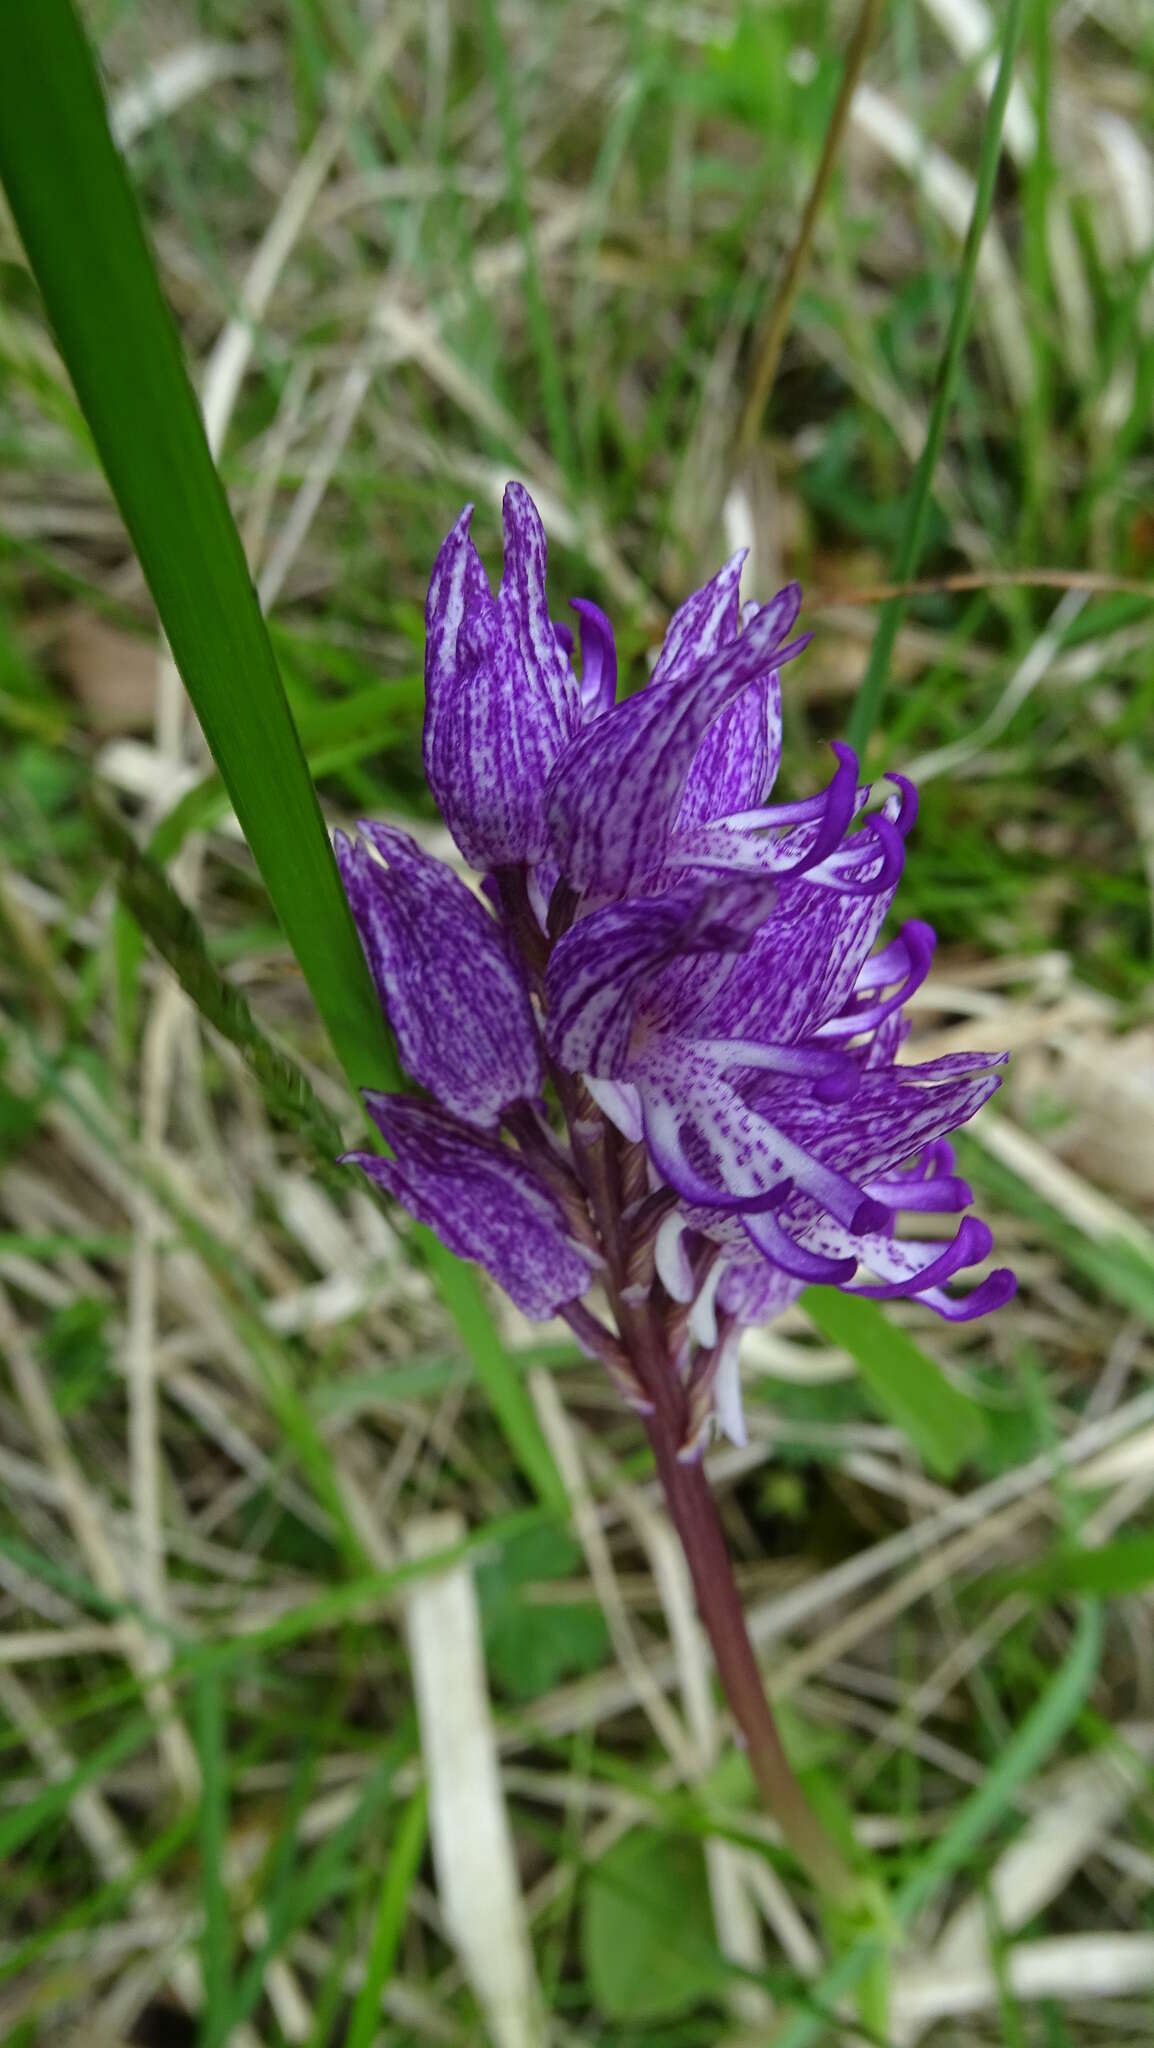 Image of Orchis angusticruris Franch.